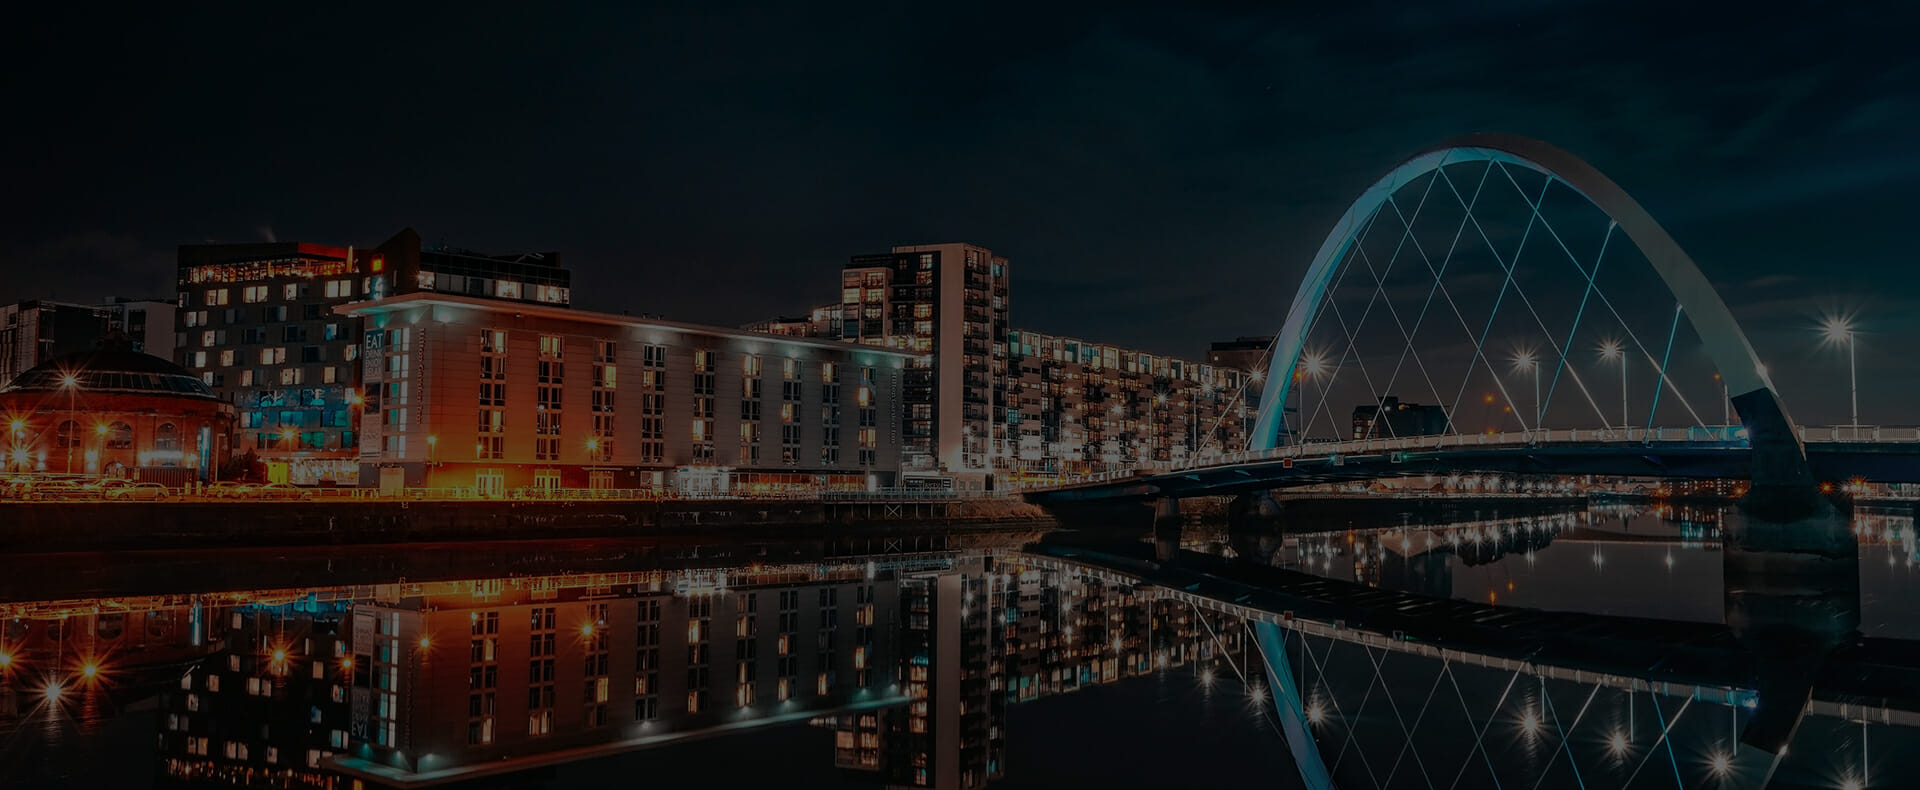 glasgow city arc bridge over river clyde at night with lit buildings to the side